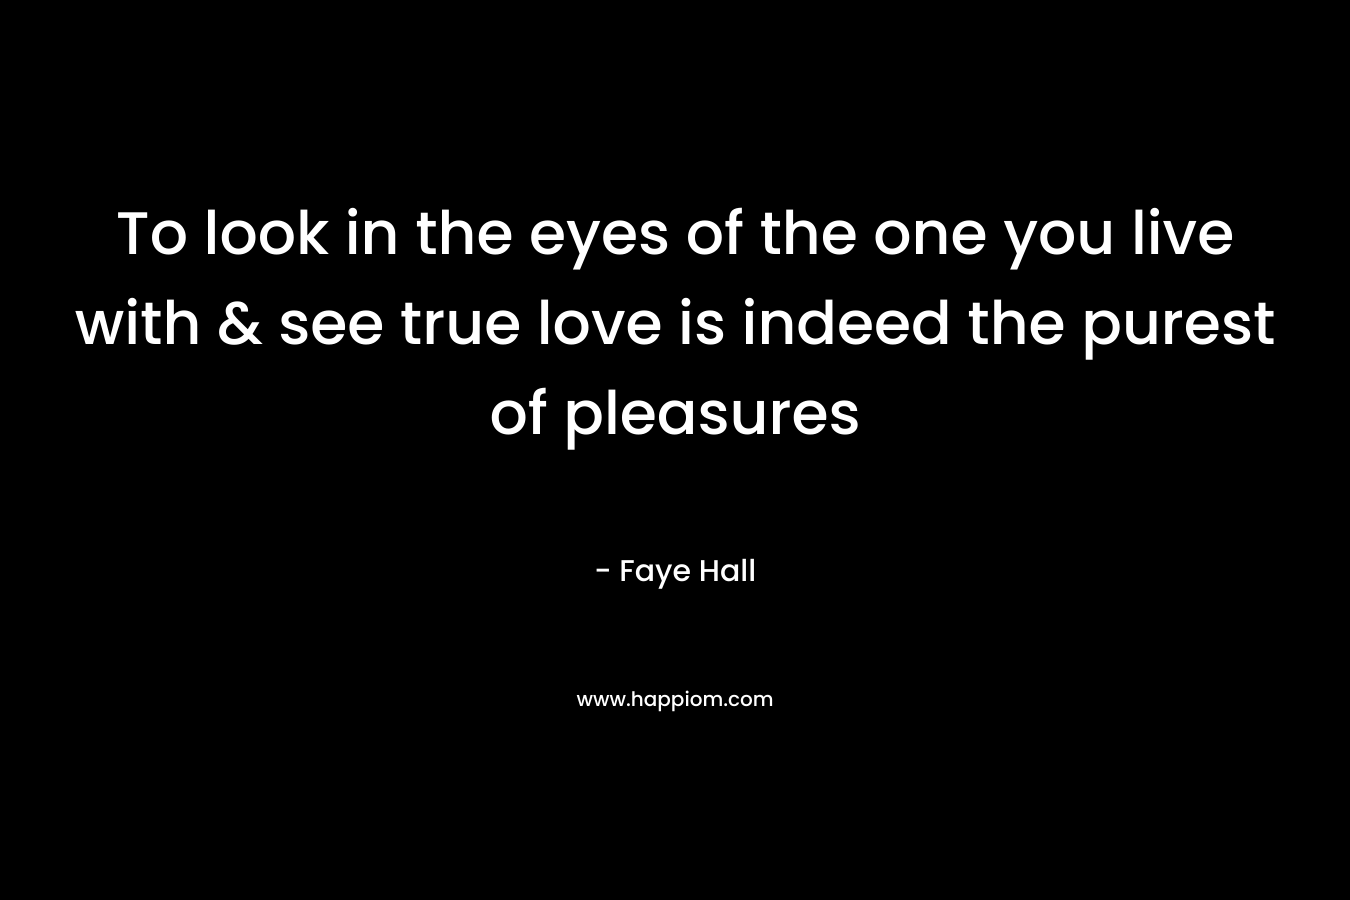 To look in the eyes of the one you live with & see true love is indeed the purest of pleasures – Faye Hall